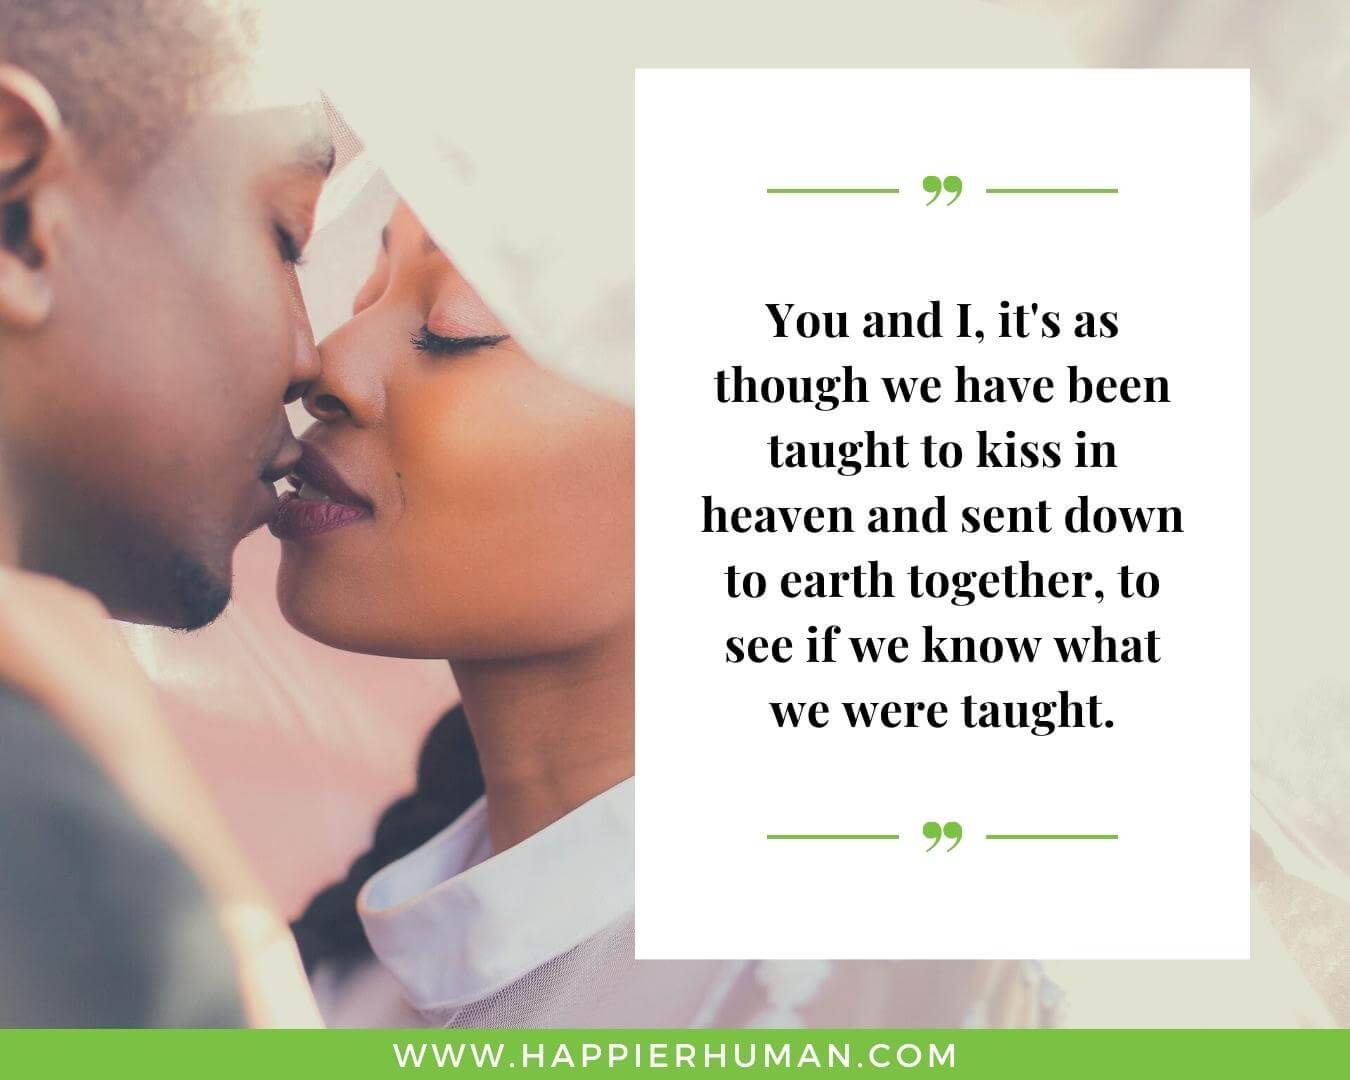 Unconditional Love Quotes for Her - “You and I, it's as though we have been taught to kiss in heaven and sent down to earth together, to see if we know what we were taught.”